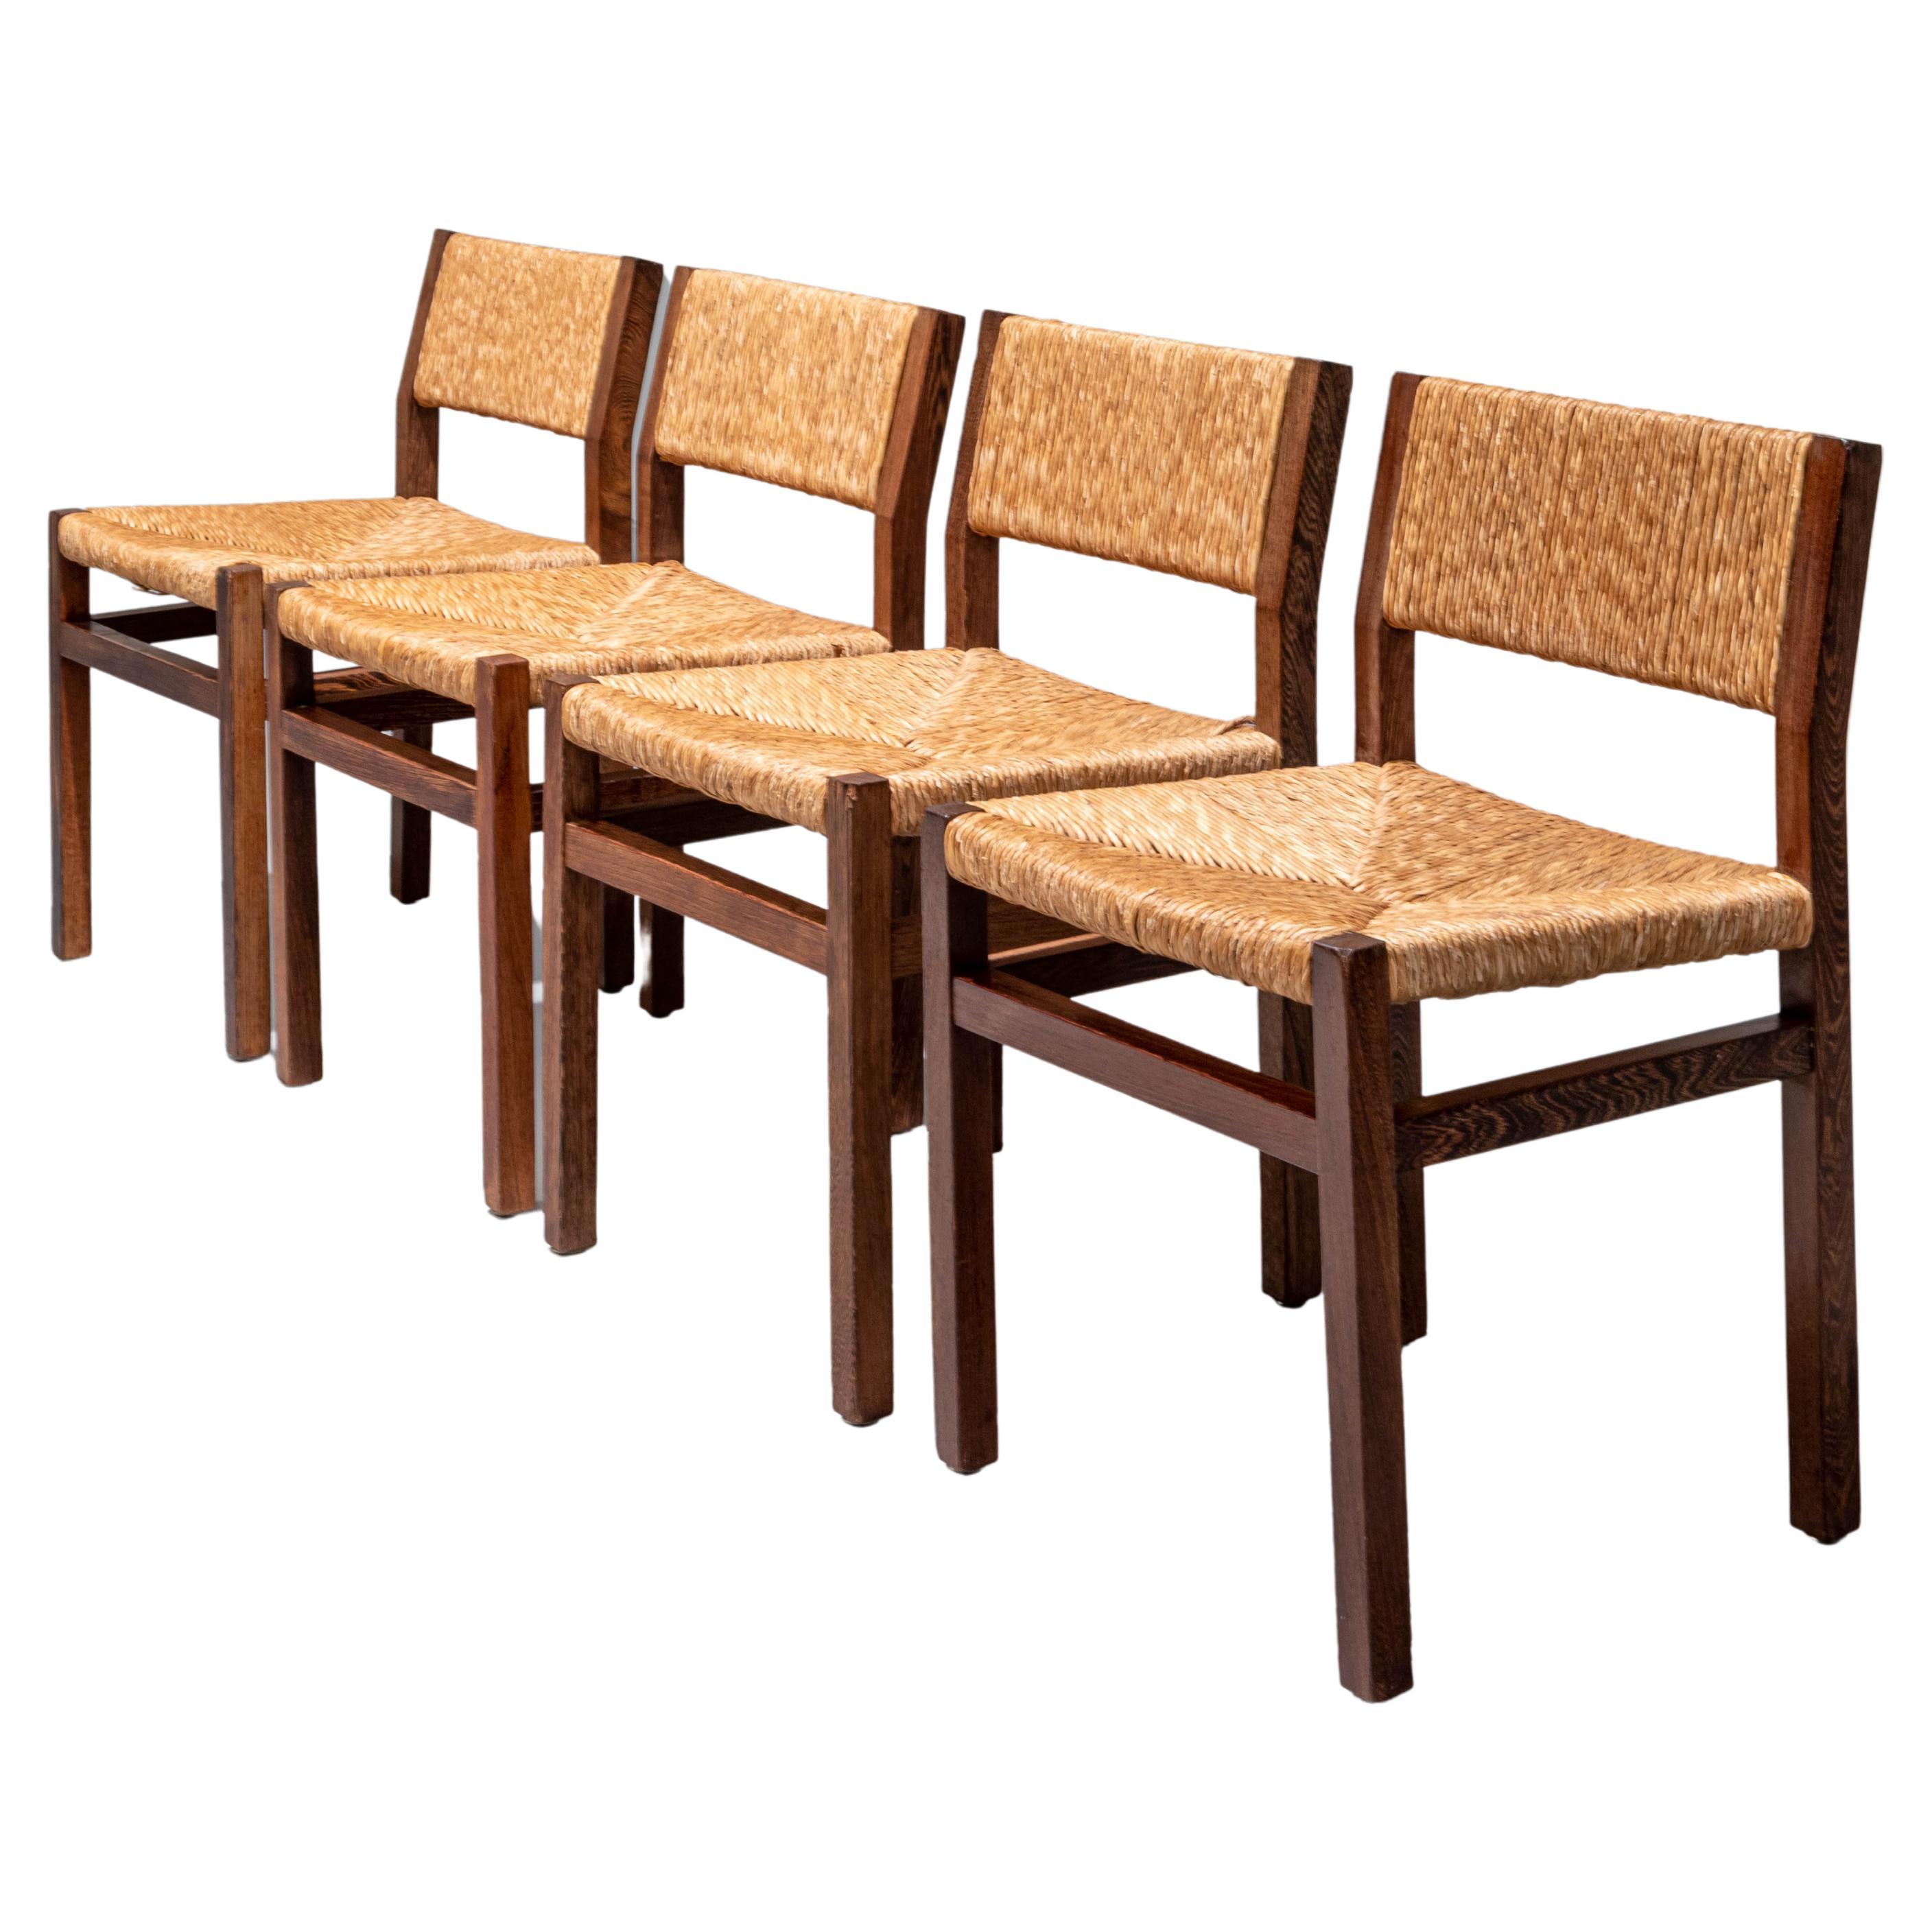 Set of 4 Dining Chairs by Martin Visser for 'T Spectrum in Wengé Hardwood, 1967